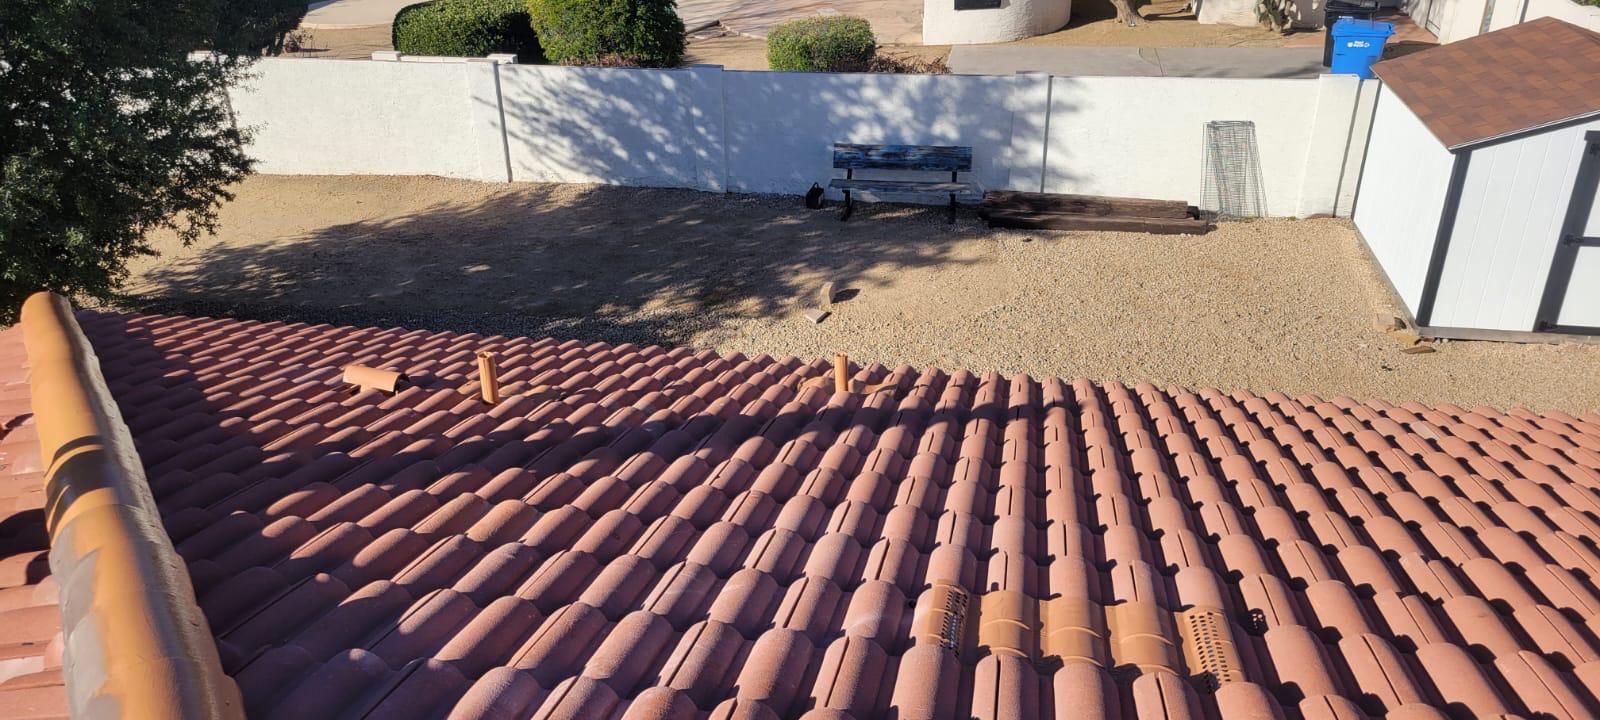 Precision tile re-felt repair being conducted in Chandler.